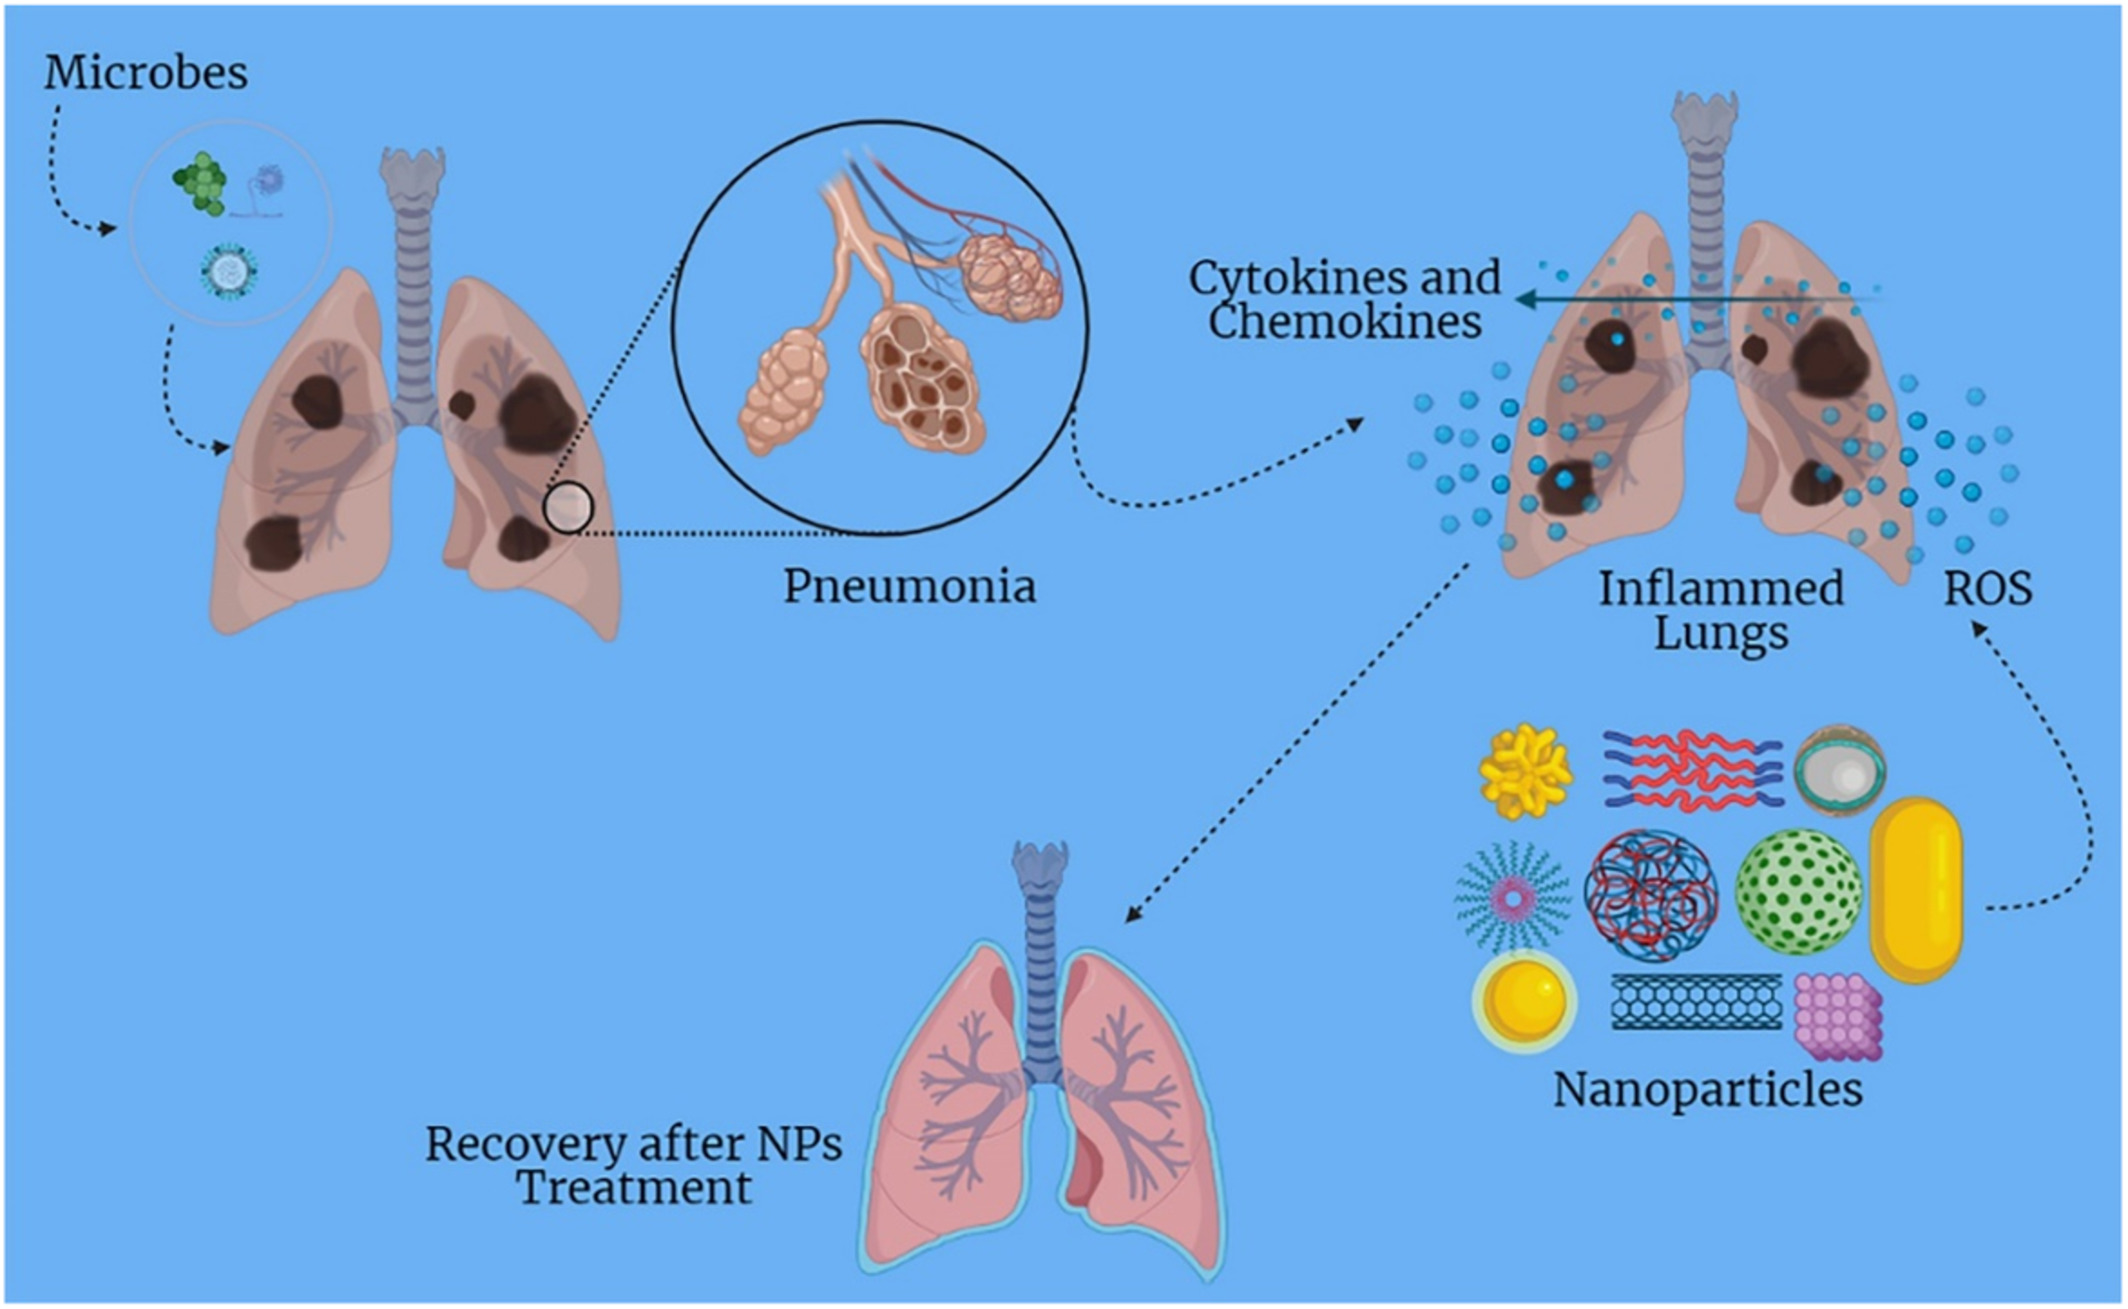 Inflammation‐modulating nanoparticles for pneumonia therapy